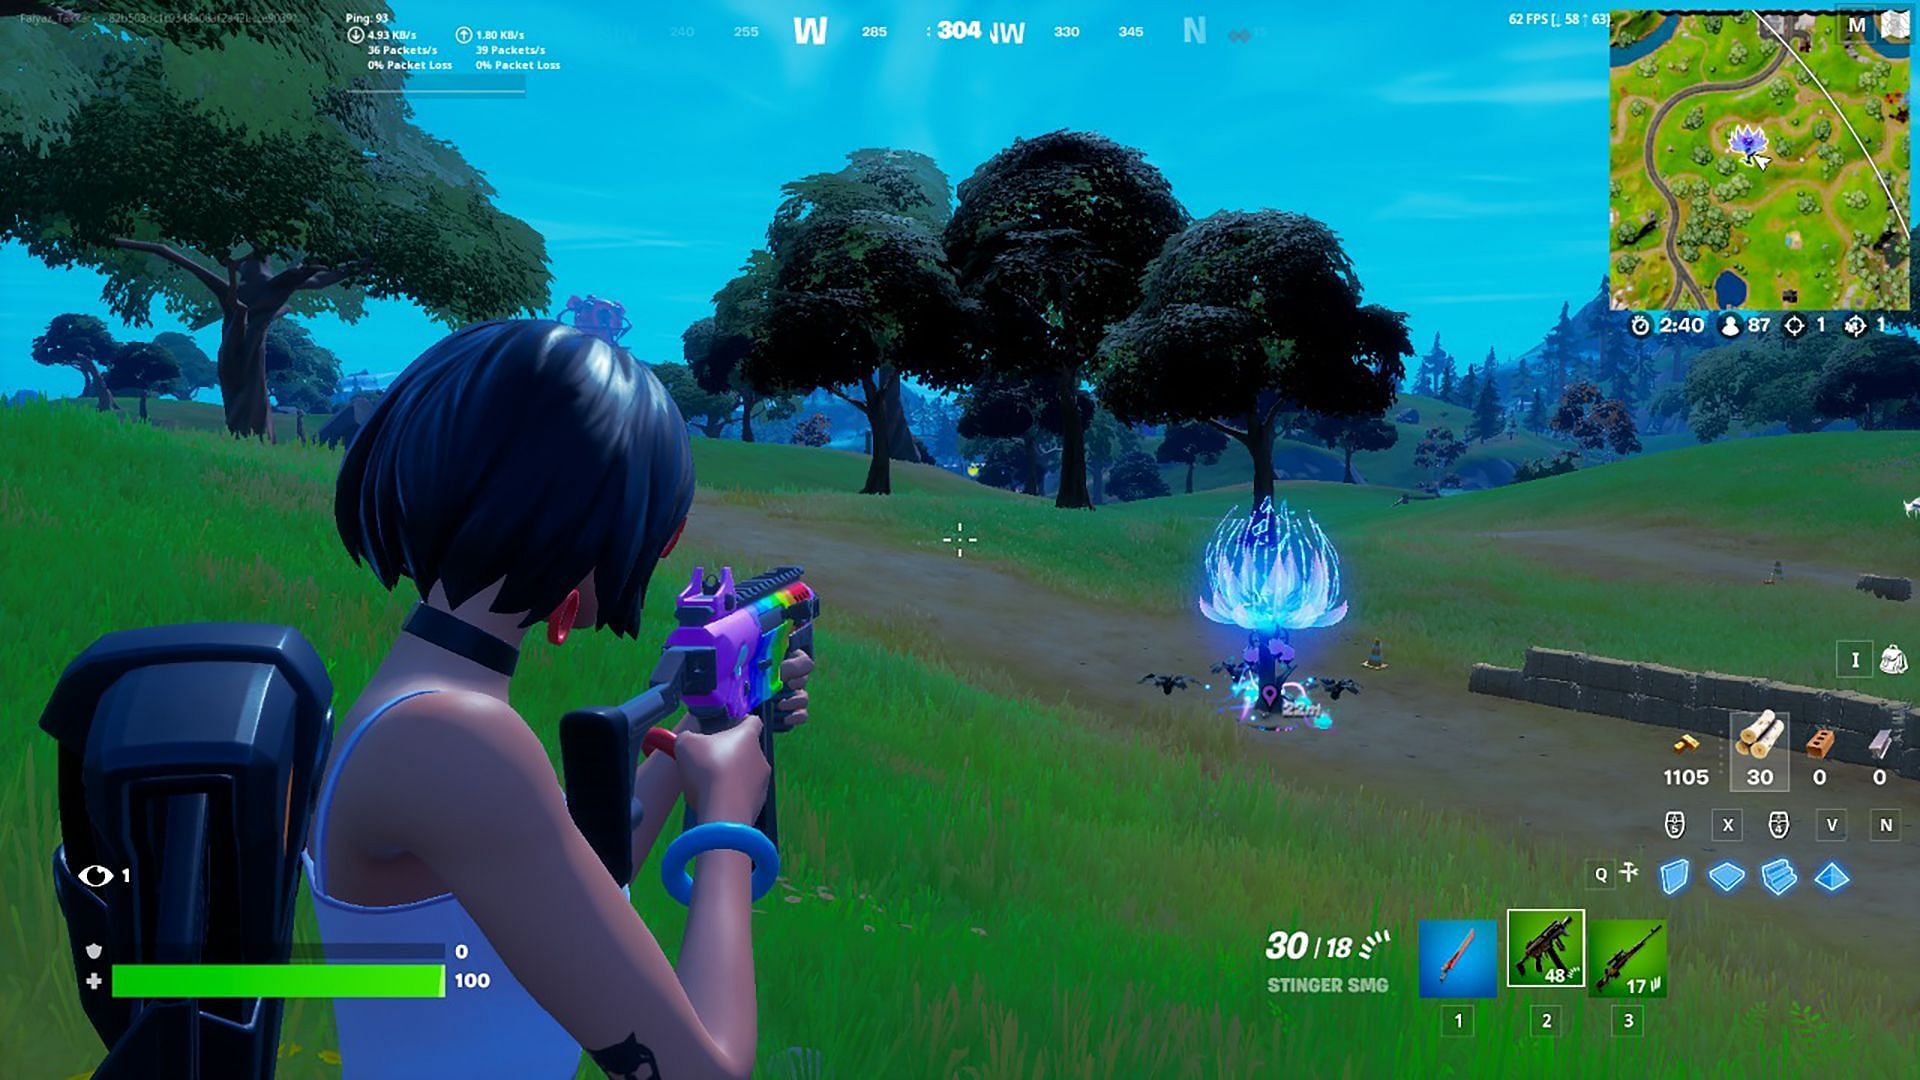 A player using Aim Down Sight in the game (Image via Epic Games)